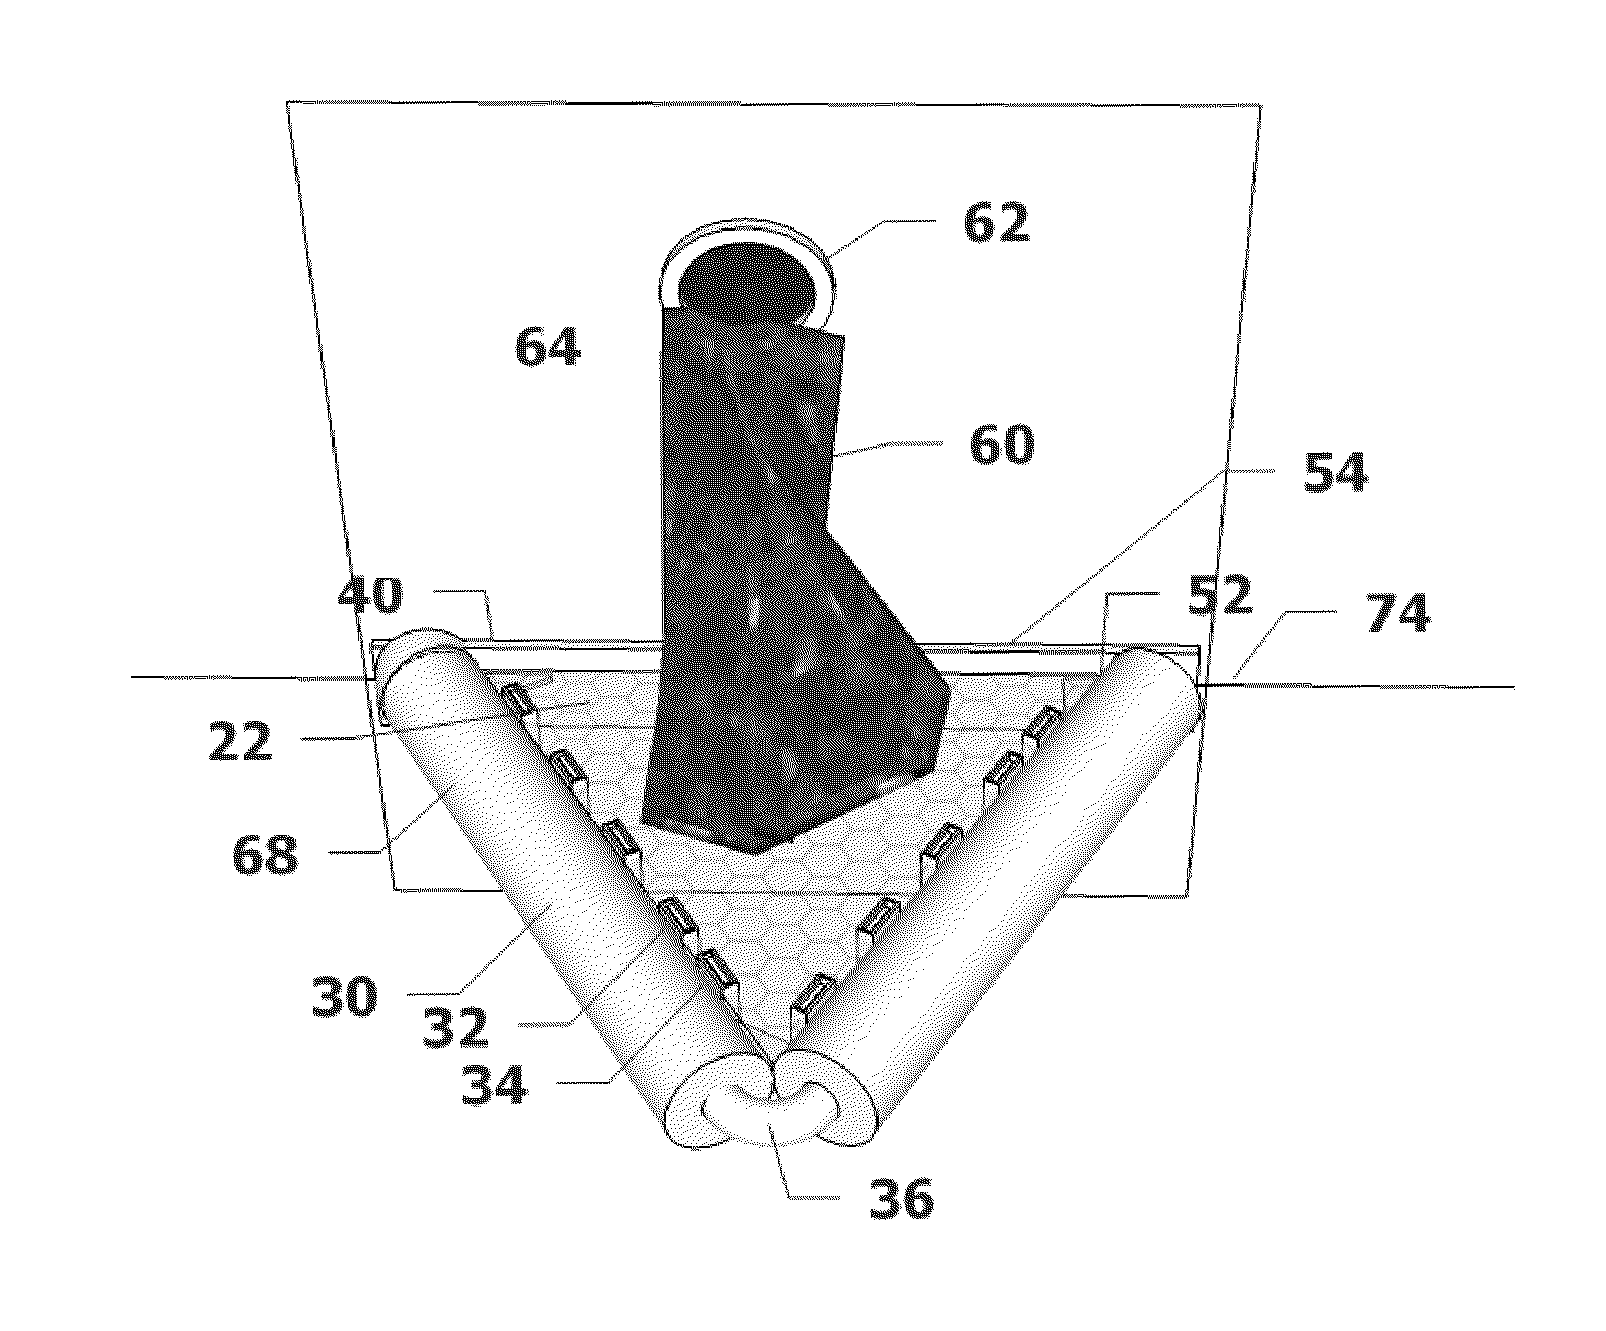 External filtering and absorbing device for use in a local containment area